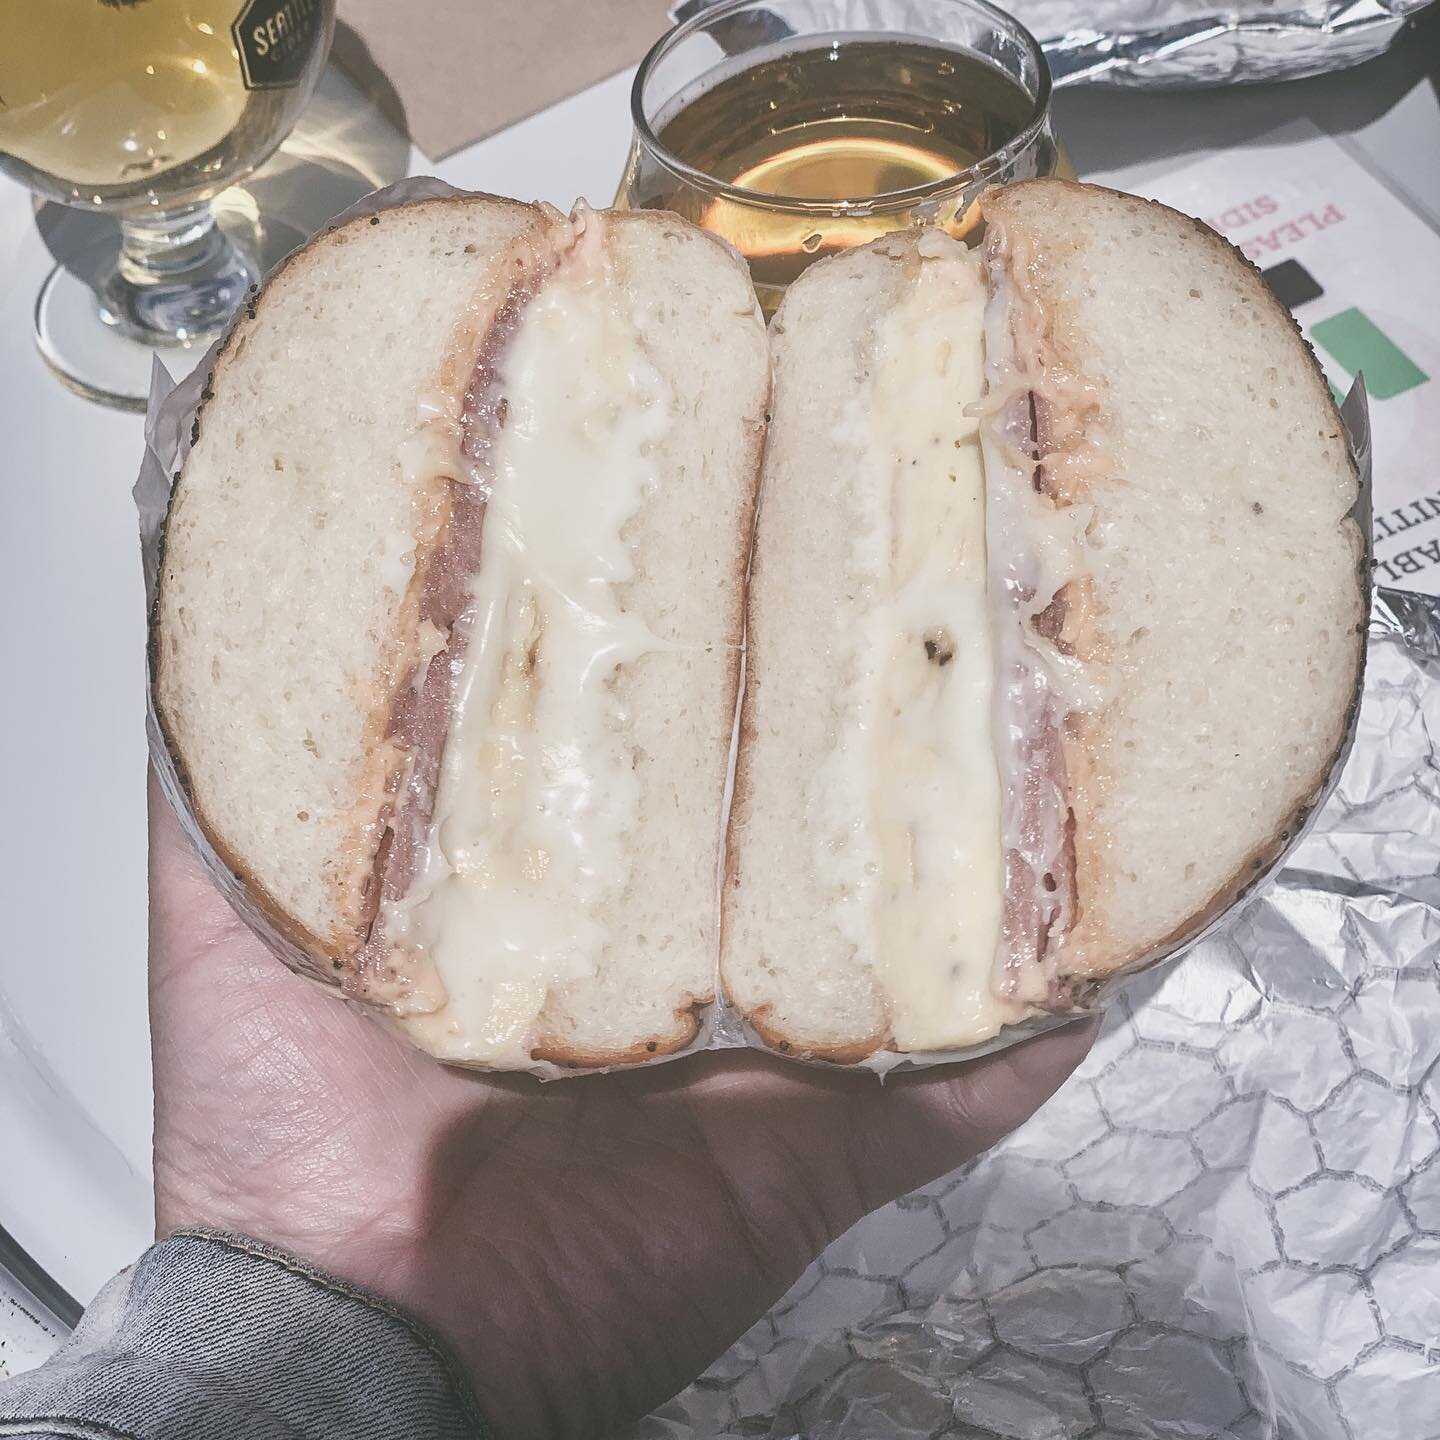 My life revolves around stalking pop ups on Instagram and planning my meals around them 😬
&middot;
Finally got my hands on @hihelenseattle breakfast sandwich and it was everything 👌🏽
&middot;
Makes me miss East Coast bodega sandwiches so much! 😩
